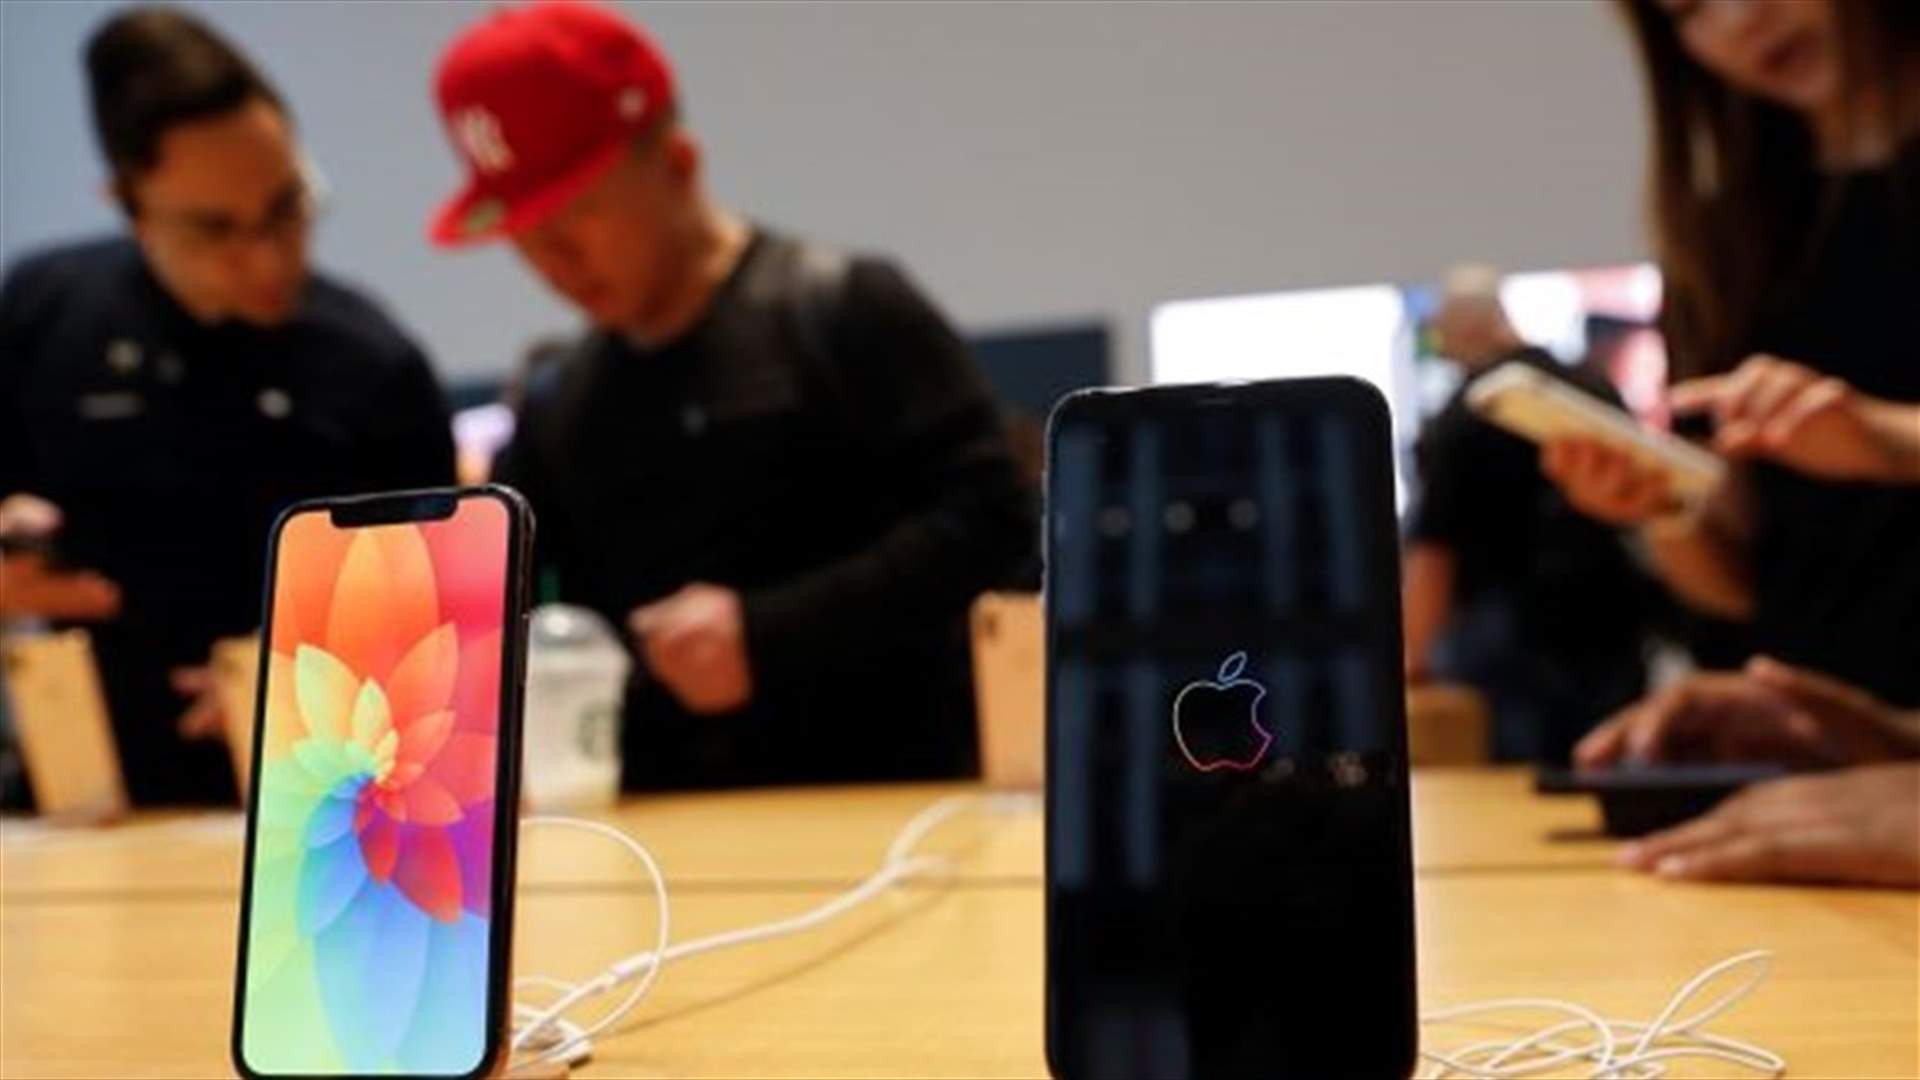 Apple Plans To Launch Three New iPhone Models This Year - WSJ